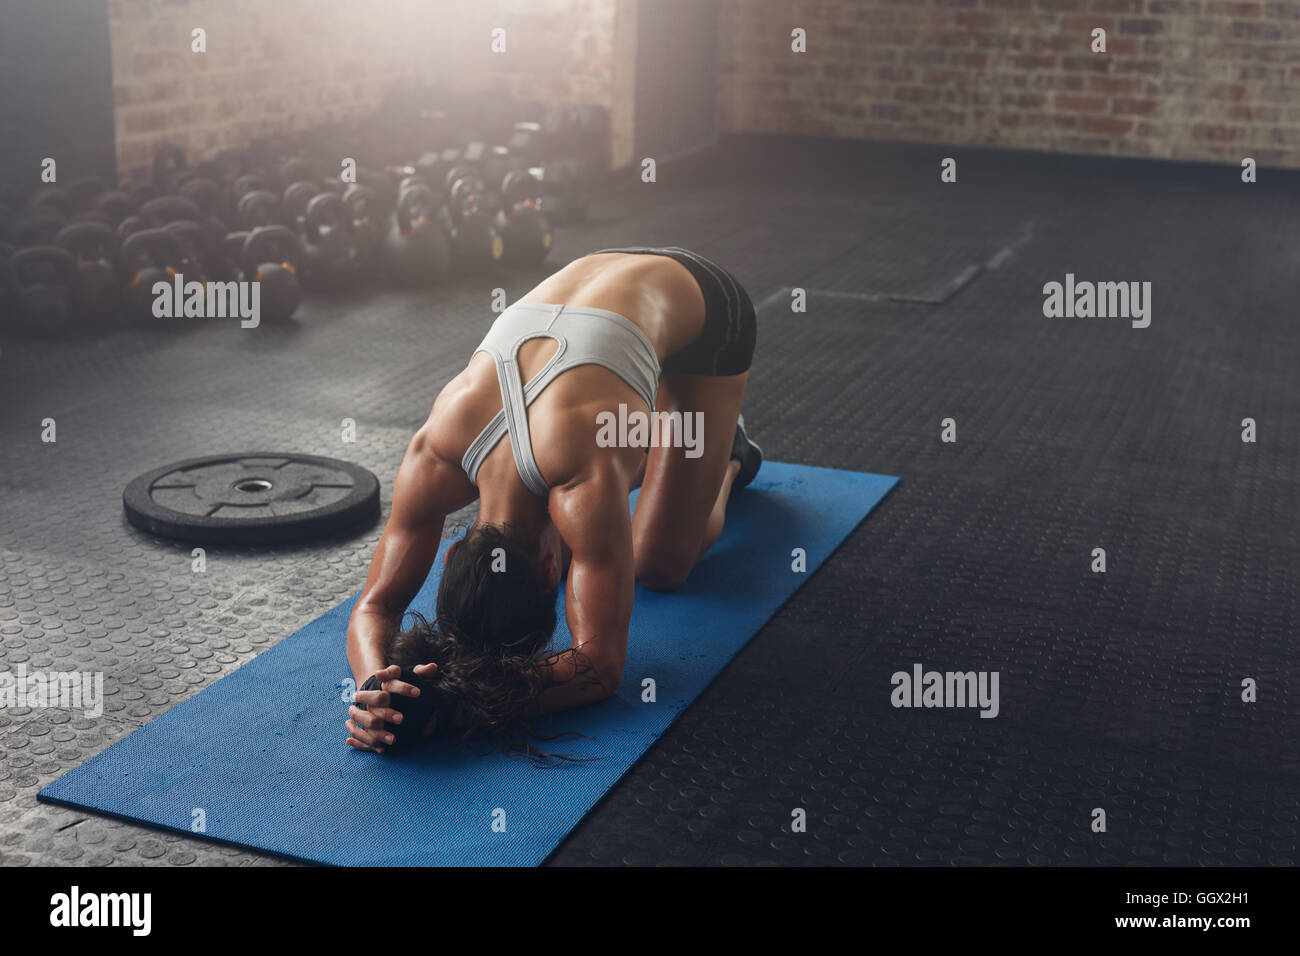 Indoor shot of young woman doing a forward bend exercise on fitness mat. Fit young woman doing pilates workout at the gym. Stock Photo